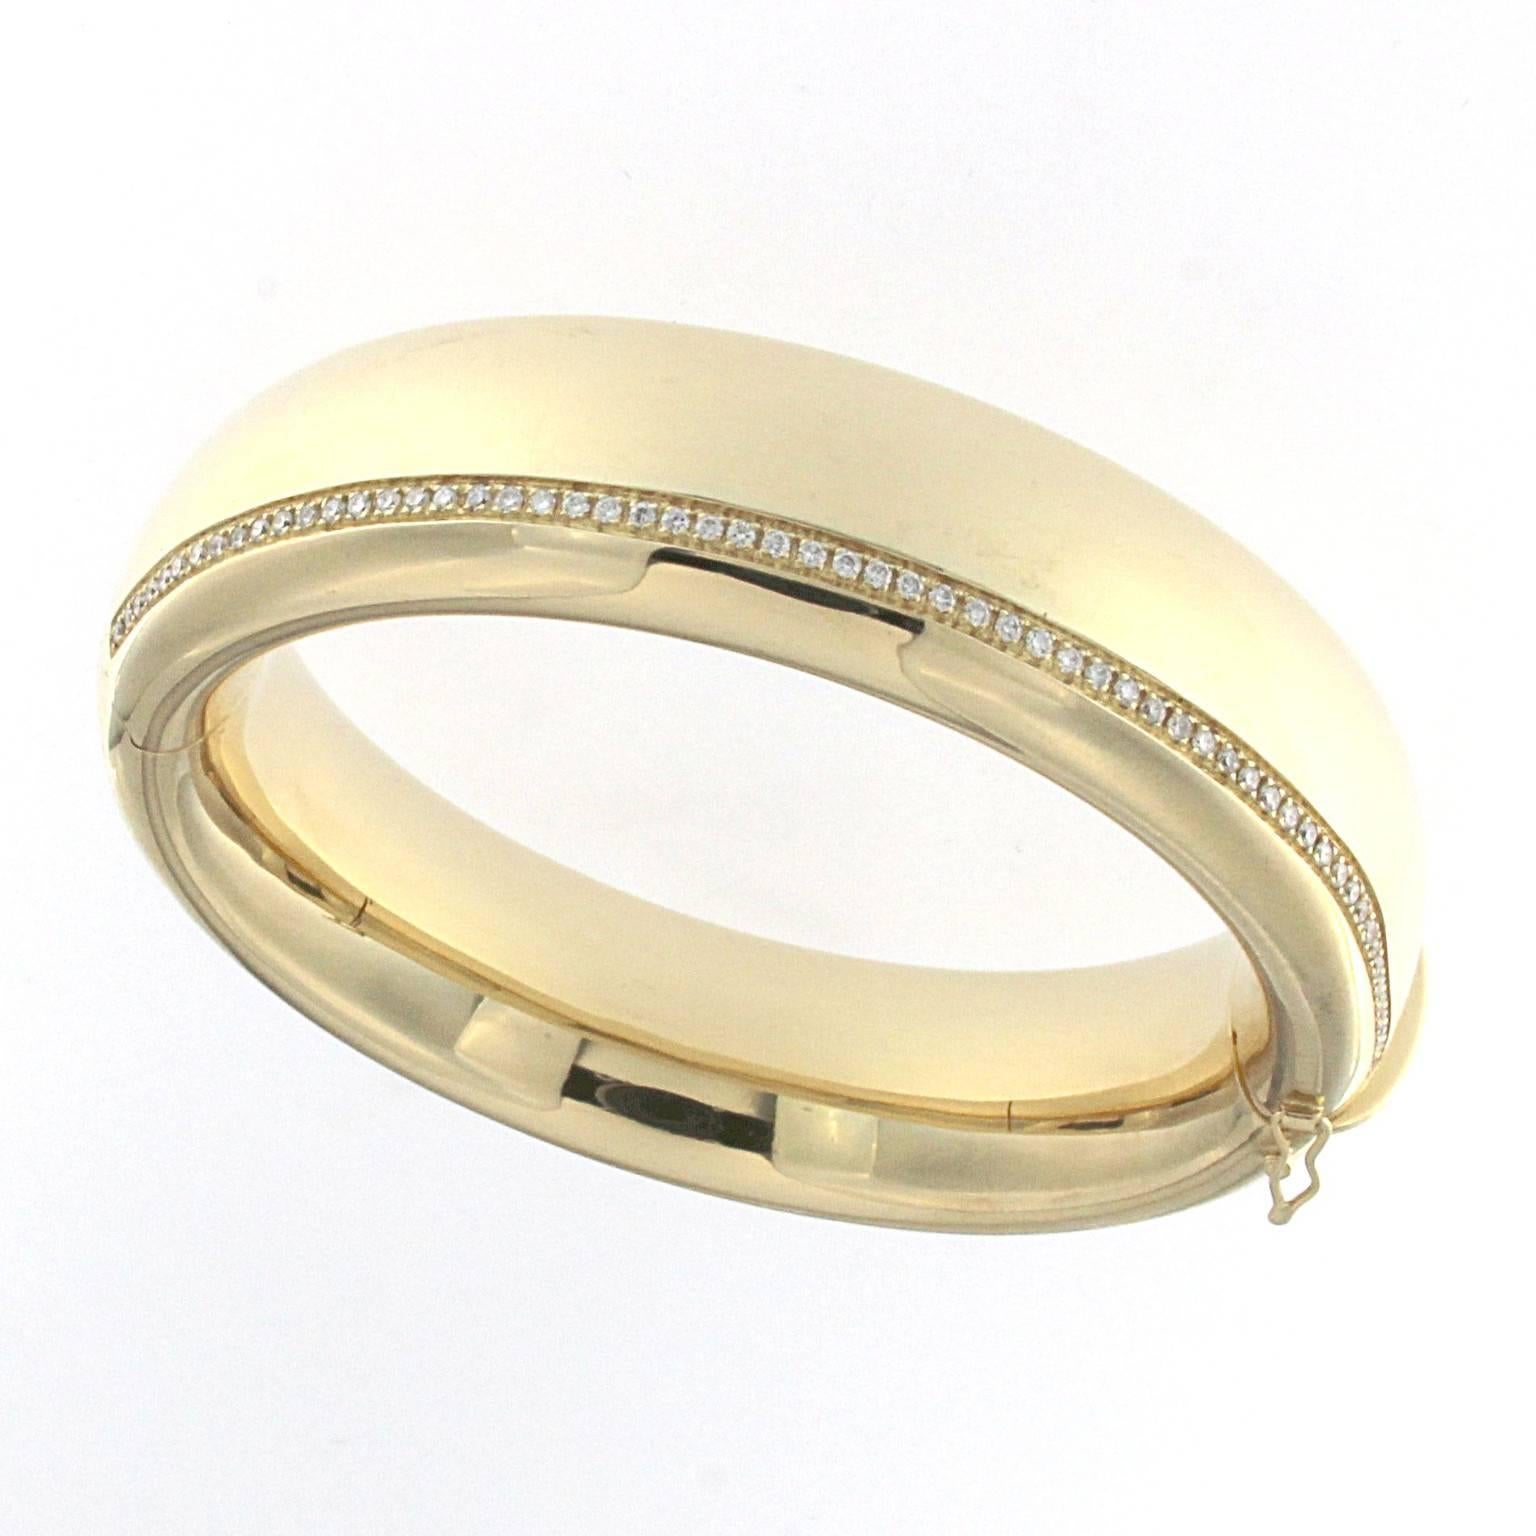 Essence bangle in 18 kt  yellow gold and white diamonds 
This classic collection in Micheletto tradition

the total weight of the gold is  gr 95.40
the total weight of the white diamonds is ct 1.53 - color GH clarity VVS1

STAMP: 10 MI ITALY